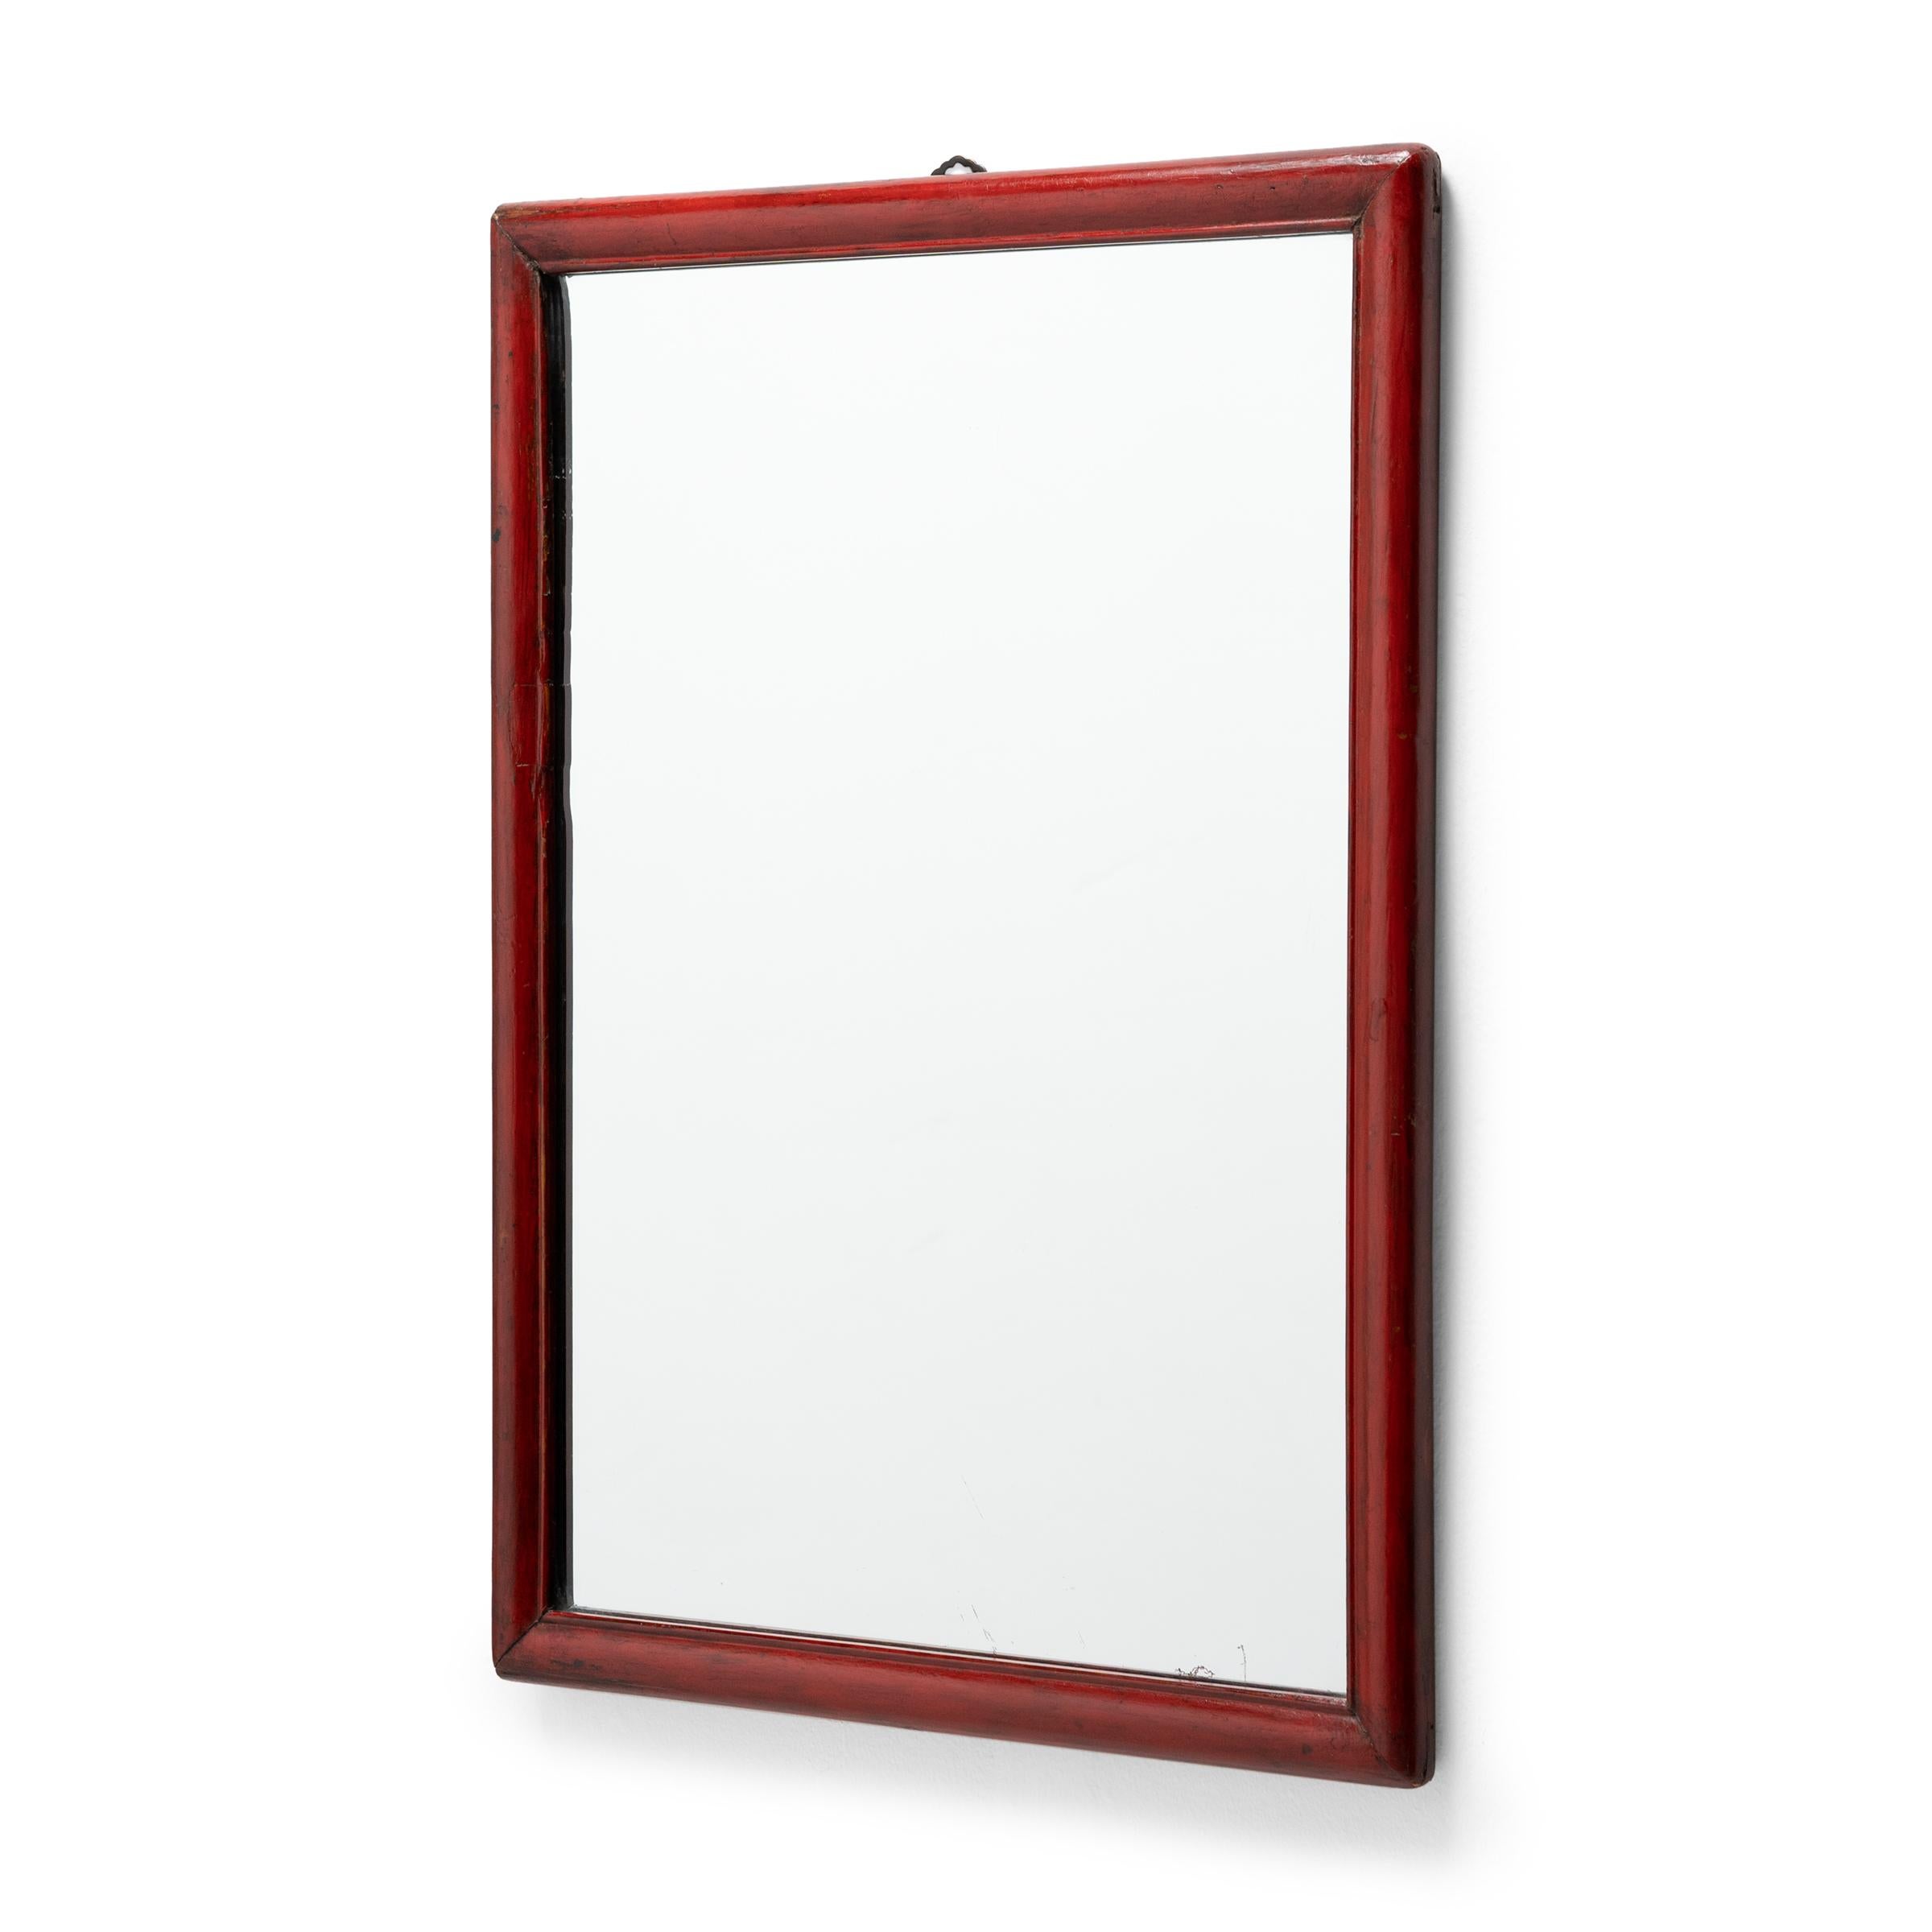 This rectangular wall mirror features a simple wooden frame with a beaded trim and a rich, red lacquer finish. Rounded corners on one side and sharp corners on the other suggest this mirror was originally part of a mirrored table screen, placed